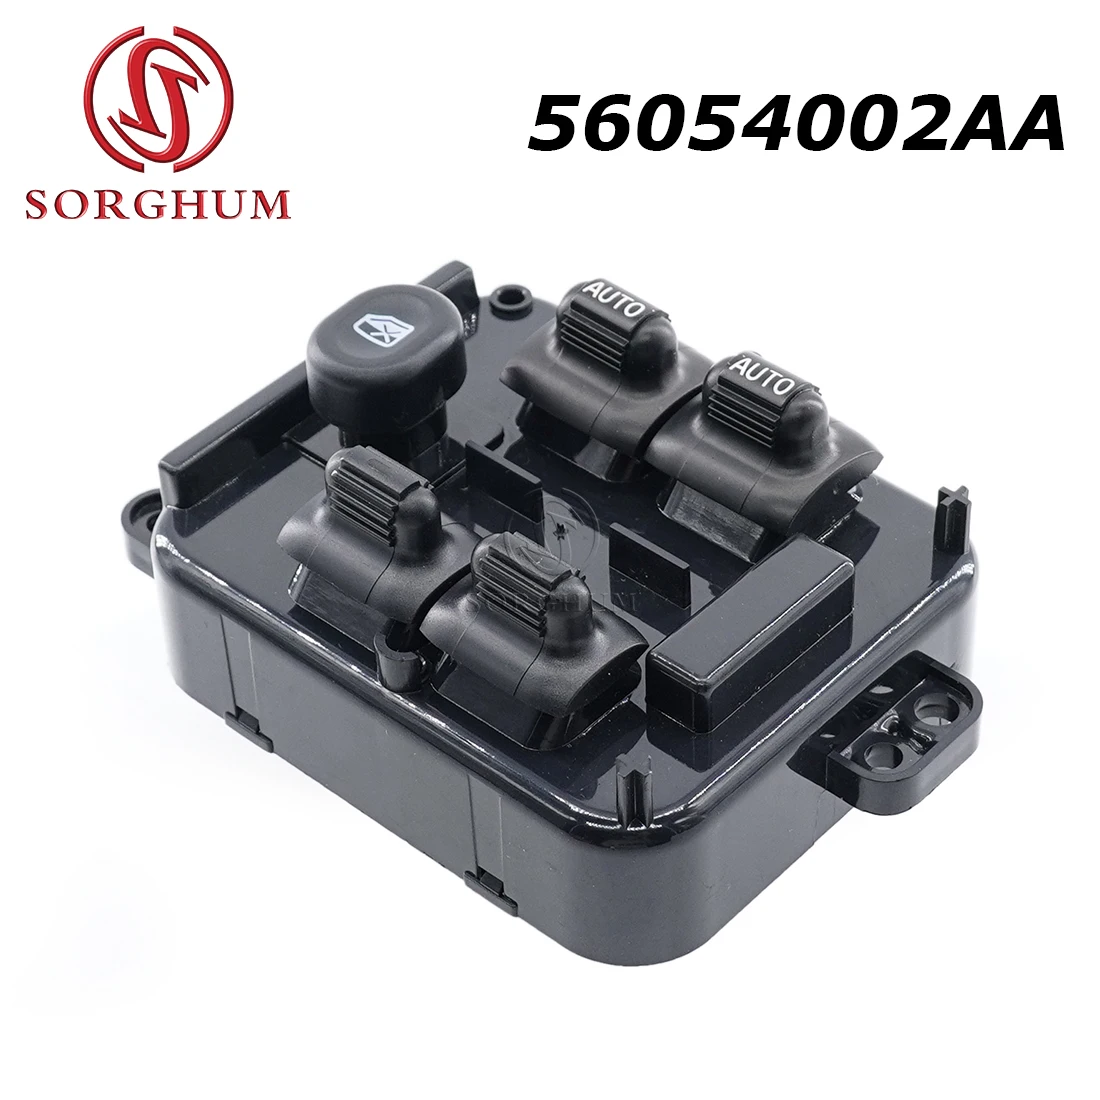 

56010677AA 56054002AA 56010090AD 56010090AE Electric Power Window Control Switch Button For Jeep Liberty 2005 2006 2007 Car Part